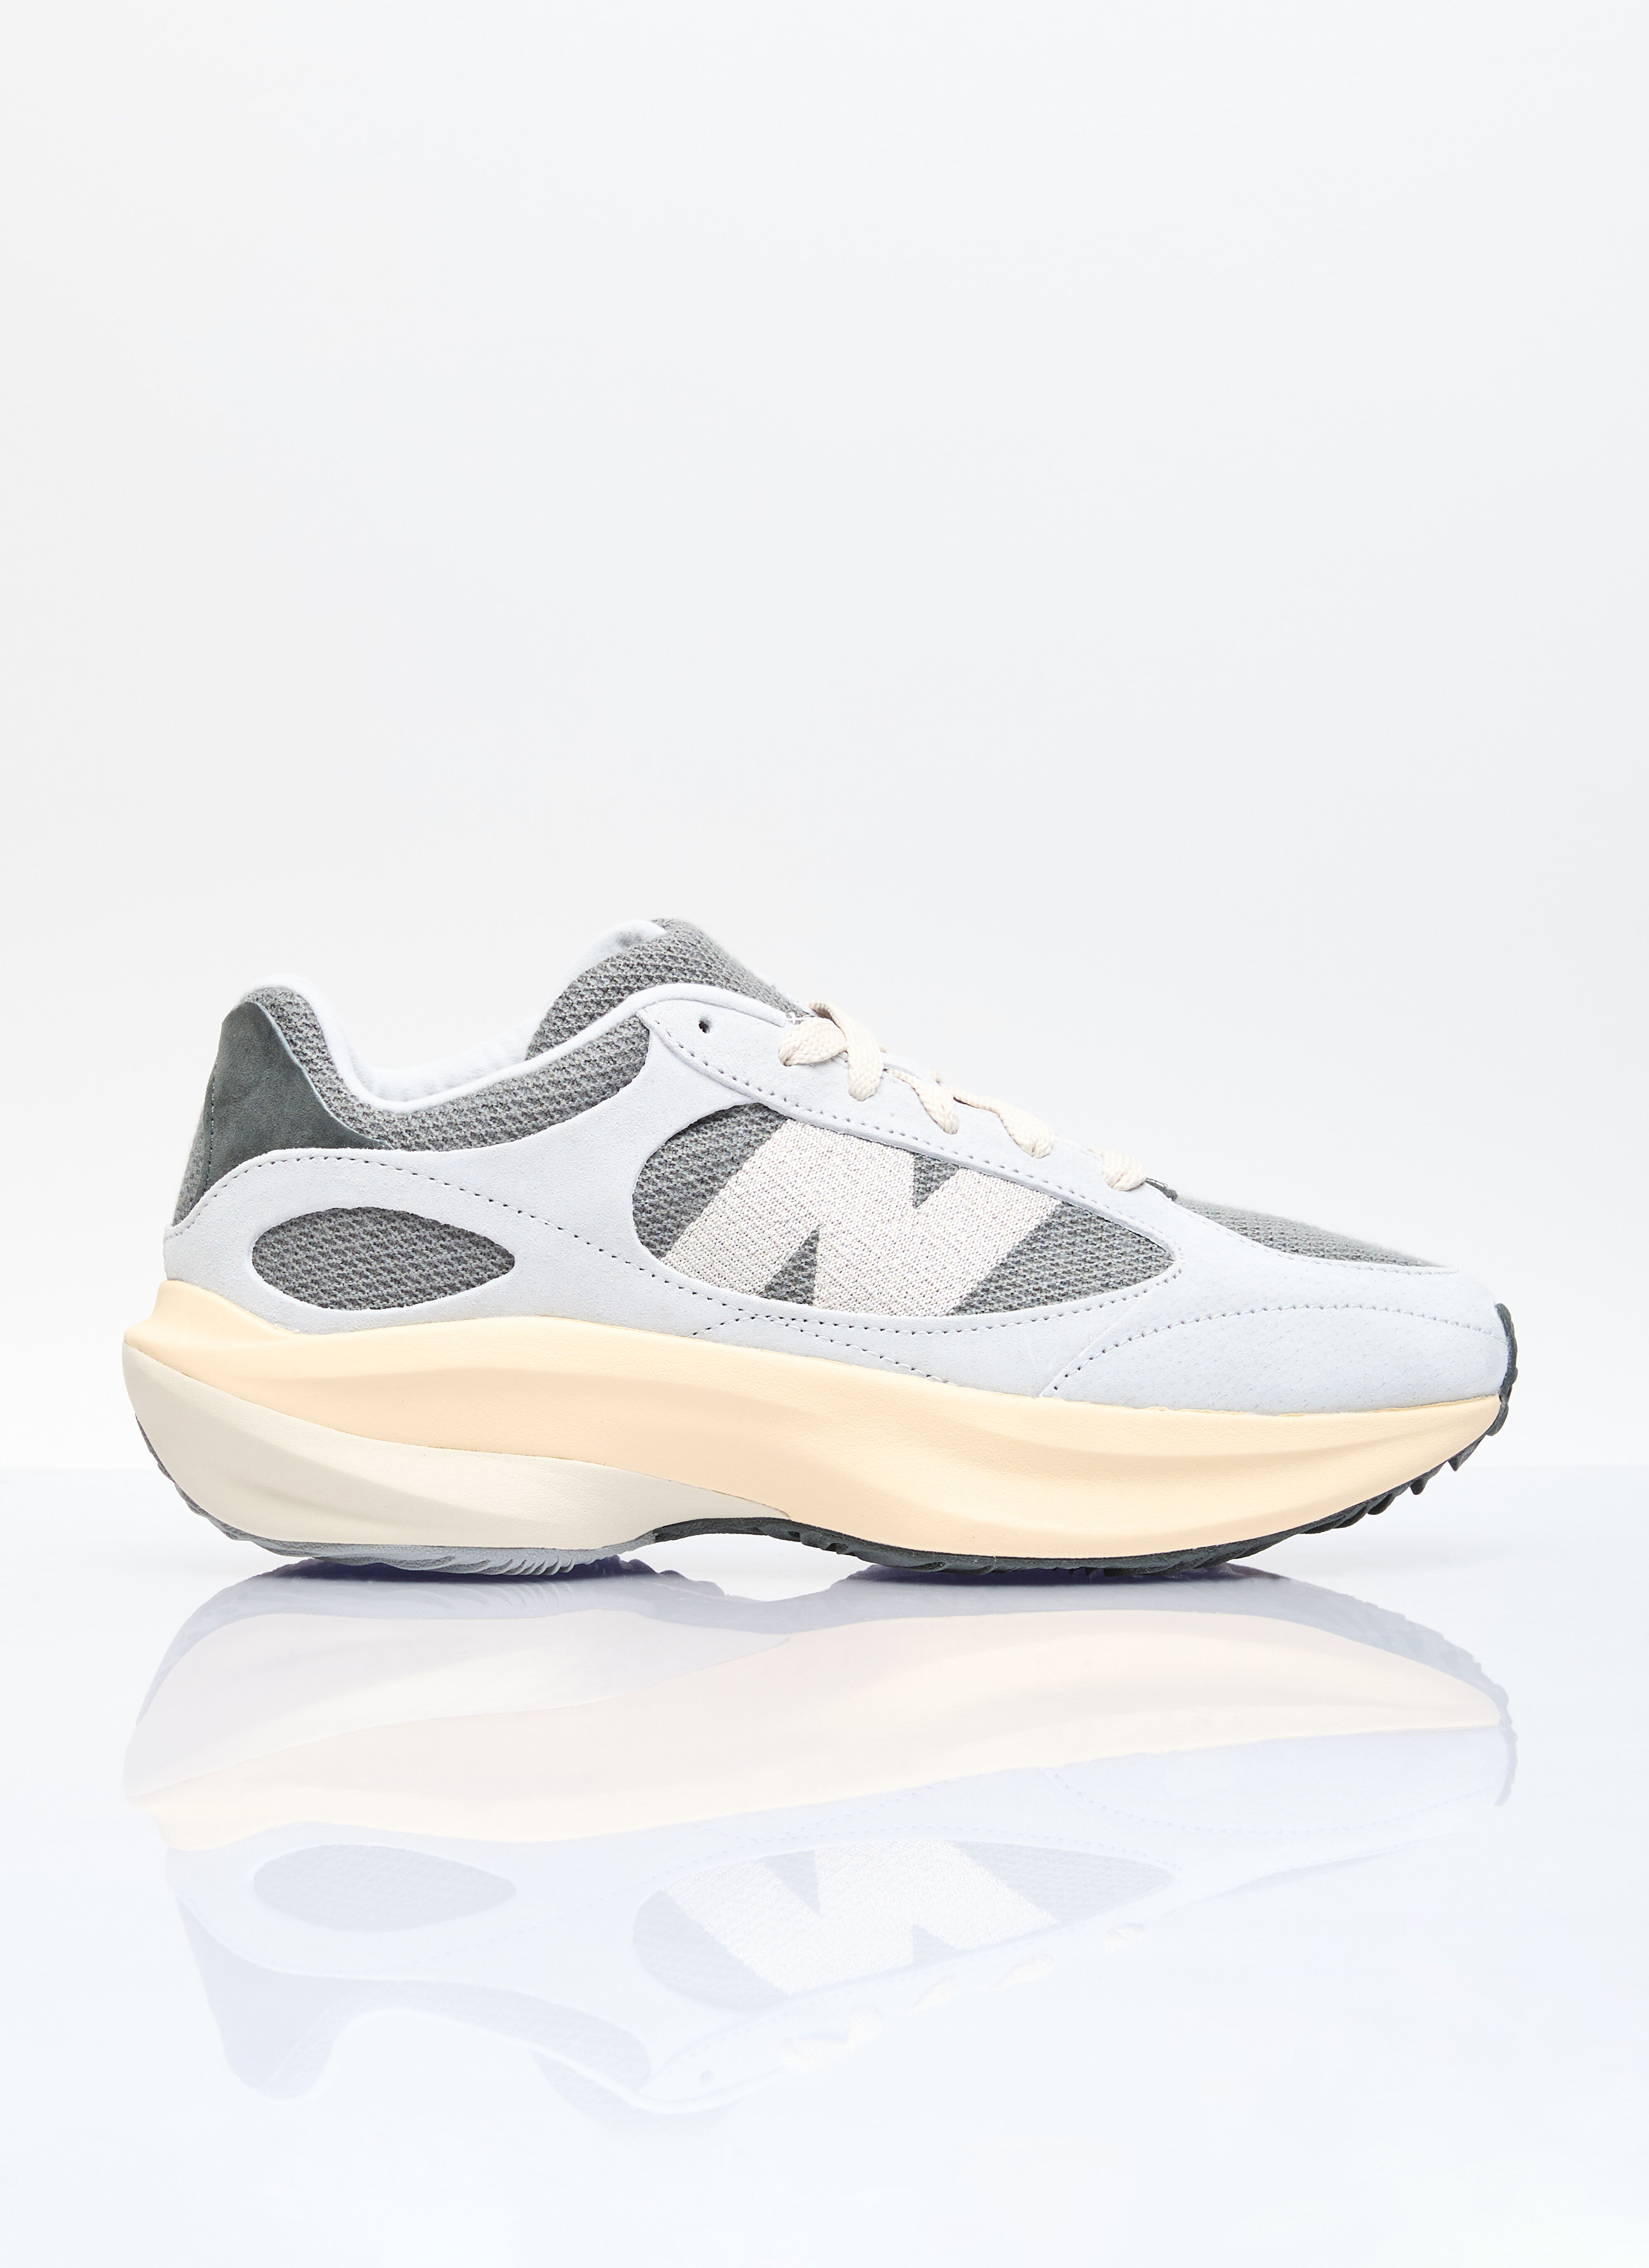 New Balance WRPD Sneakers White new0156006